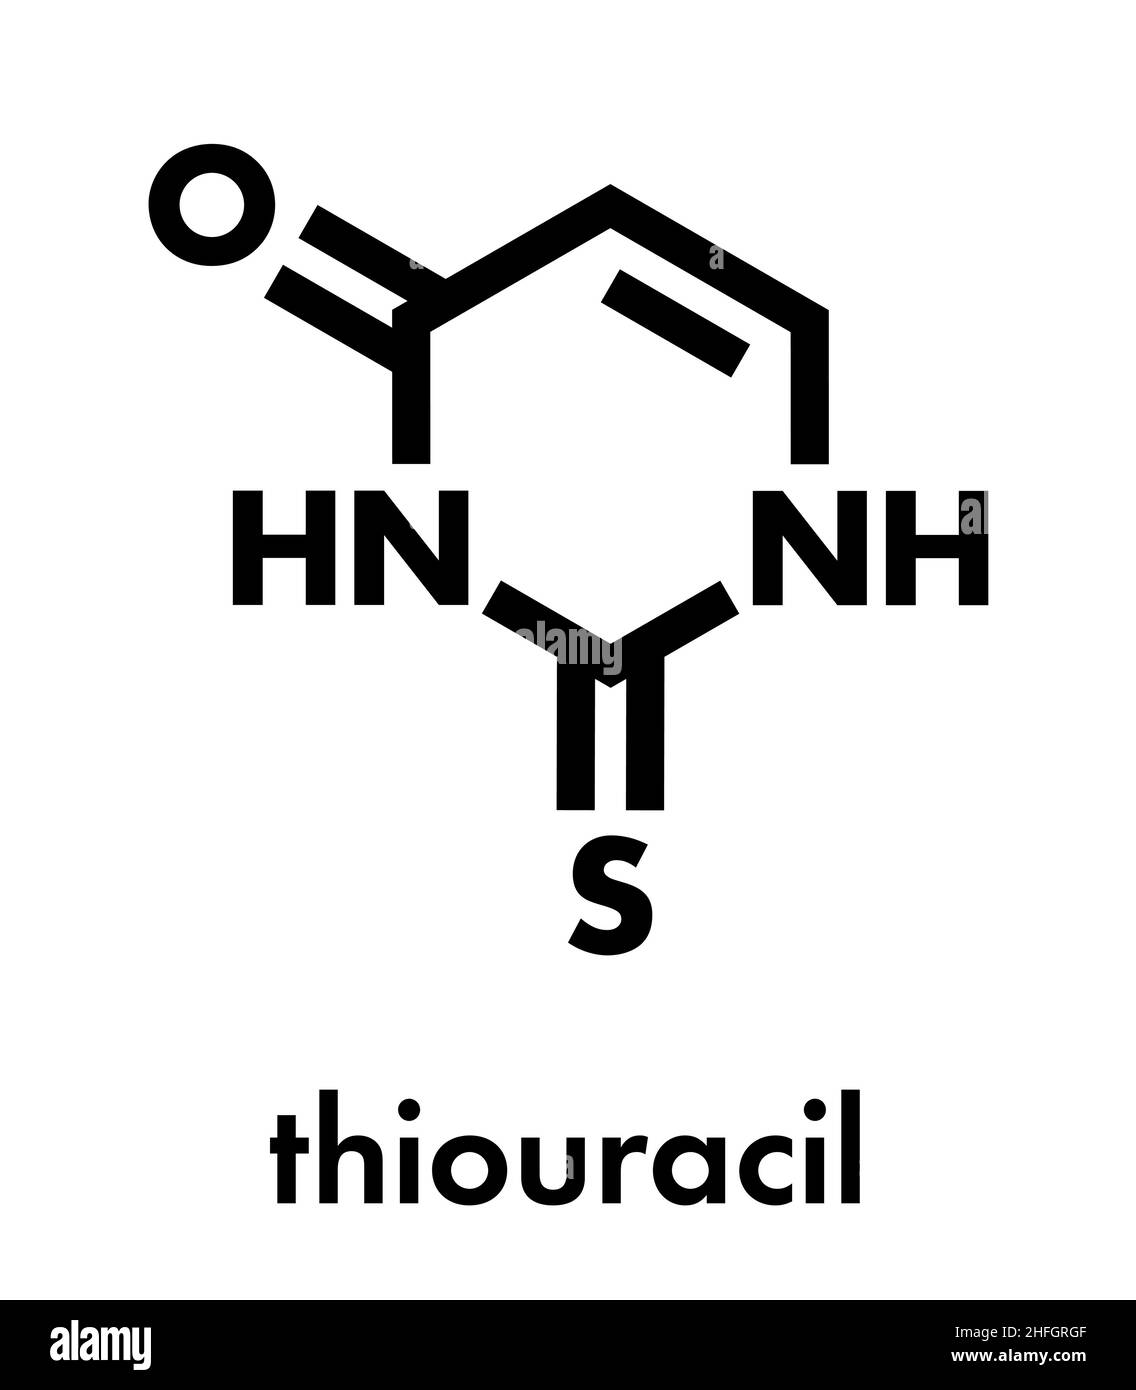 Thiouracil drug molecule. Obsolete drug molecule, previously used in the treatment of Graves' disease. Skeletal formula. Stock Vector